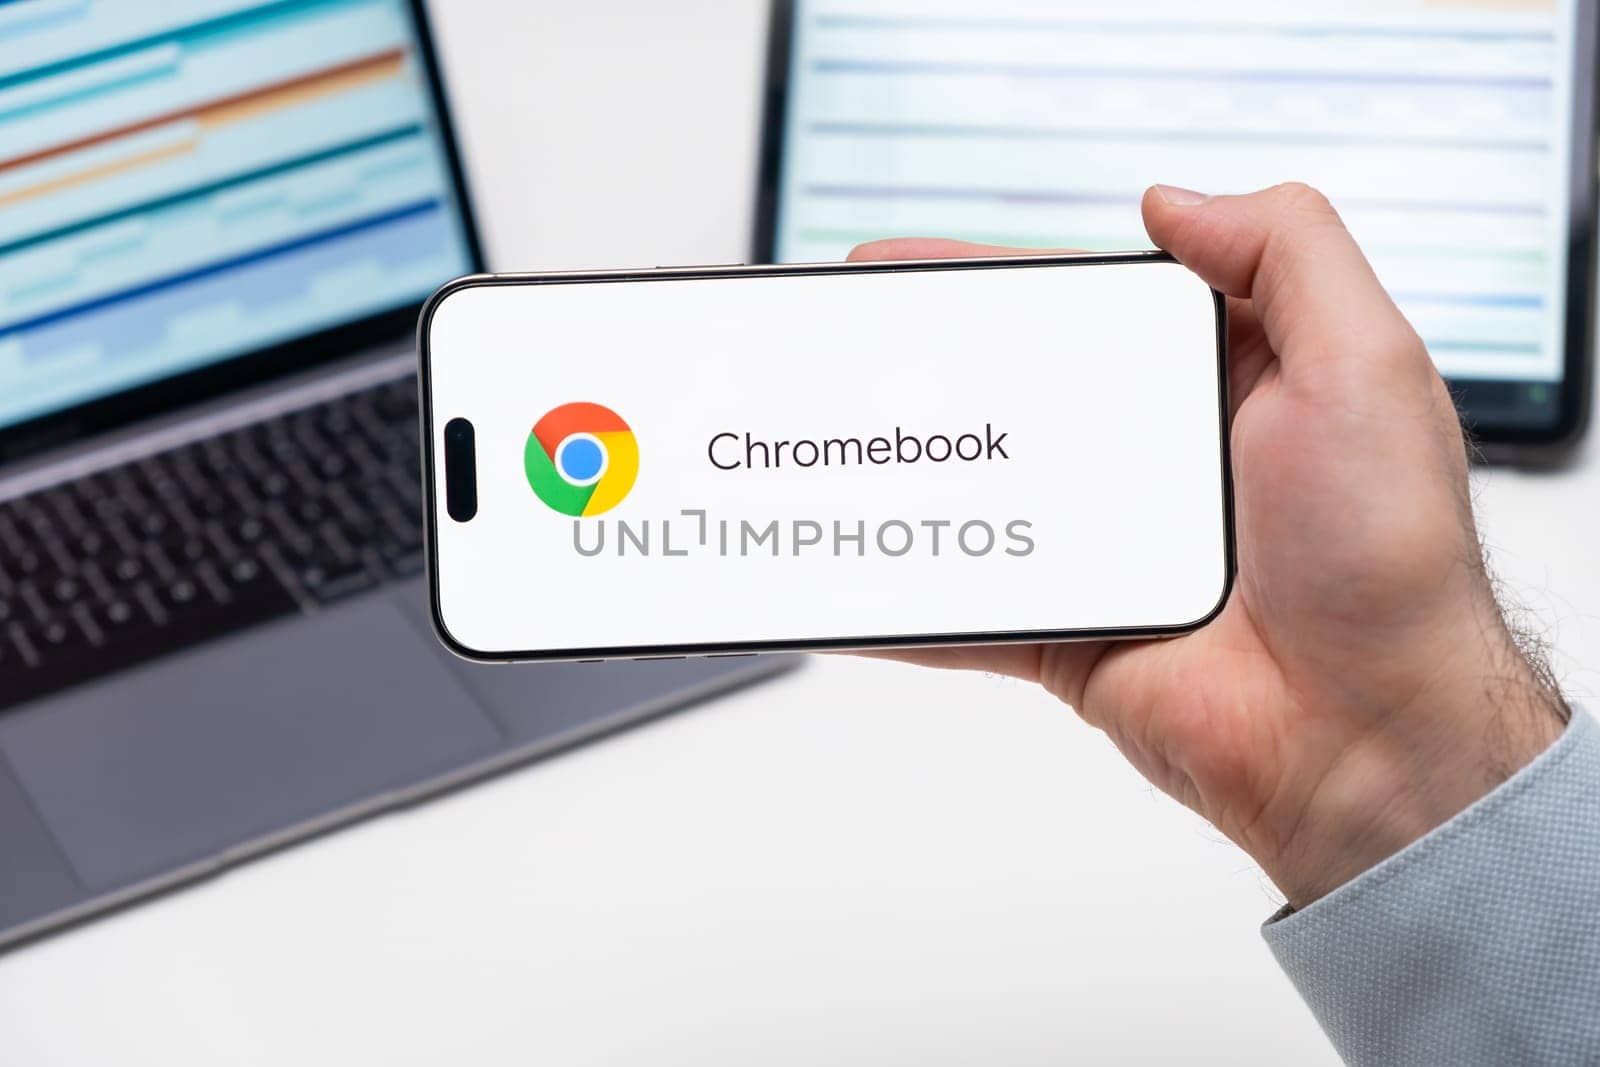 Chromebook application logo on the screen of smart phone in mans hand, laptop and tablet on the table by vladimka